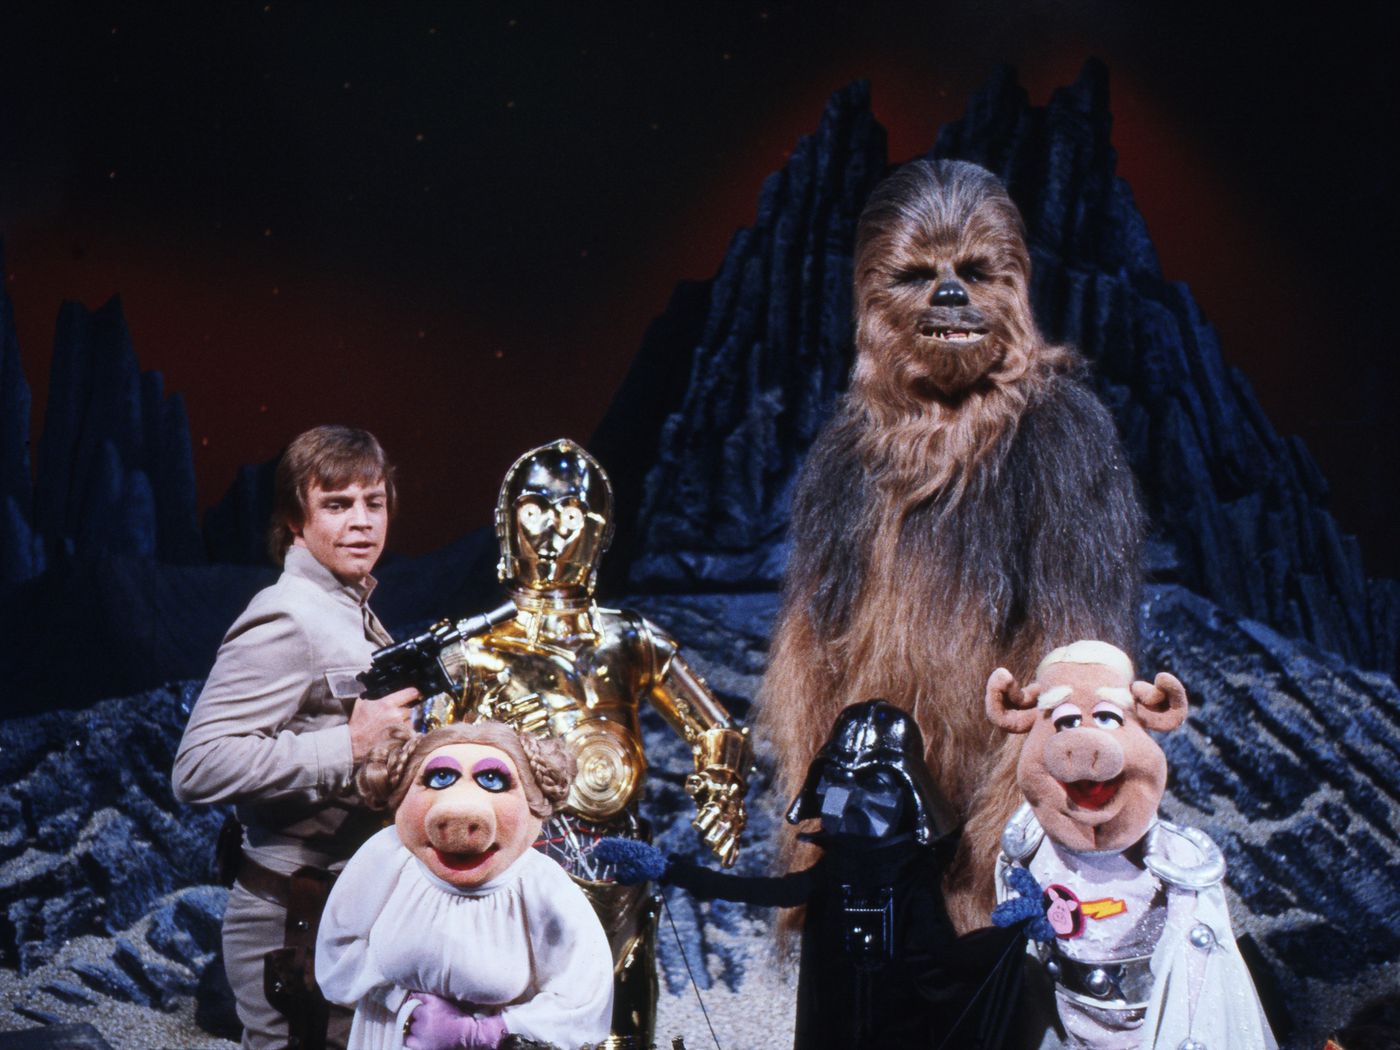 Best of the Muppets: Star Wars crossover, Jim Henson's tribute & Muppet Thor